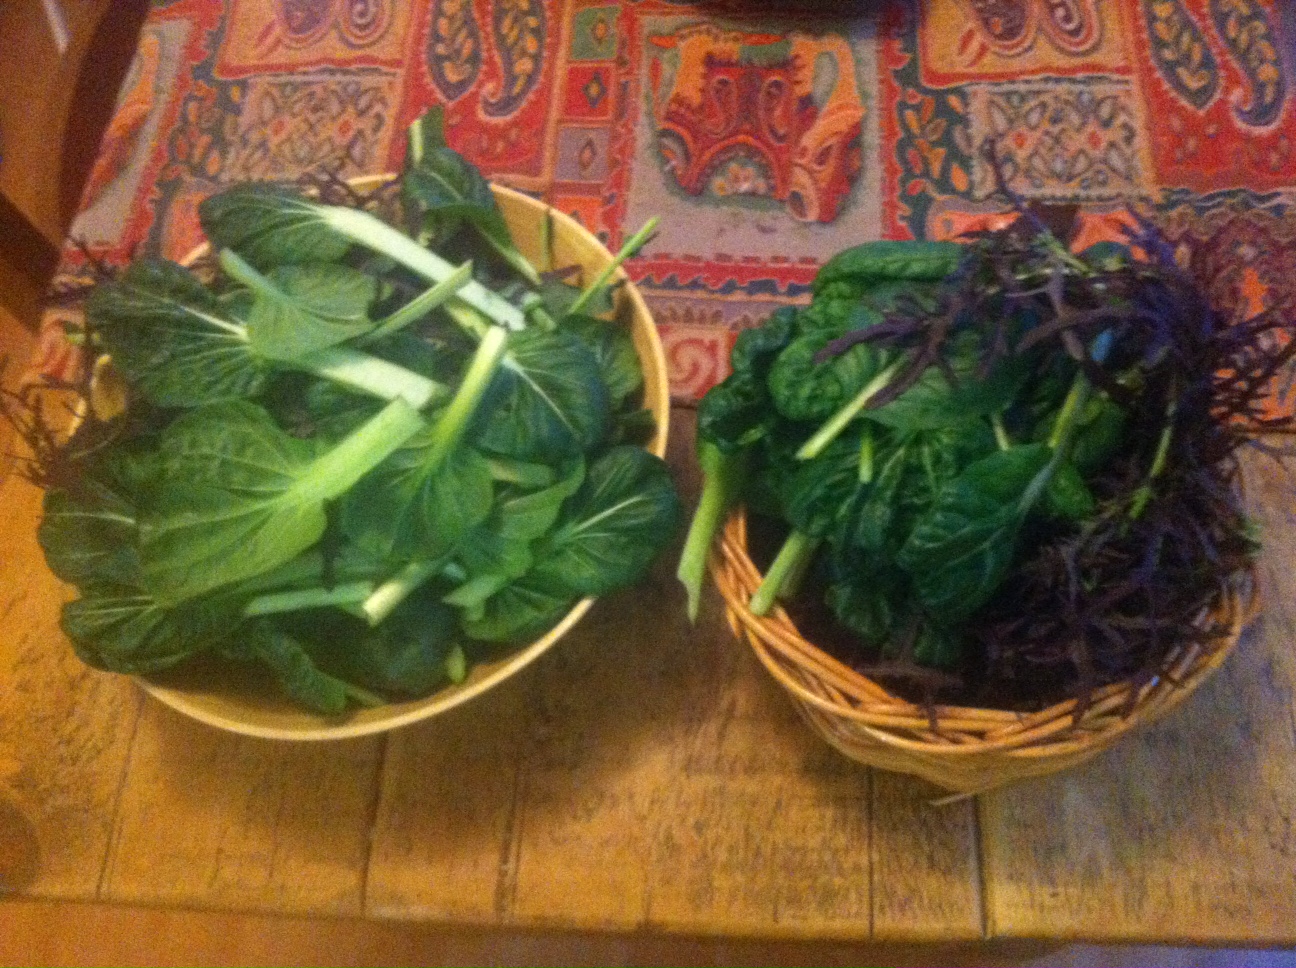 Two bowls of green leafy home grown veg